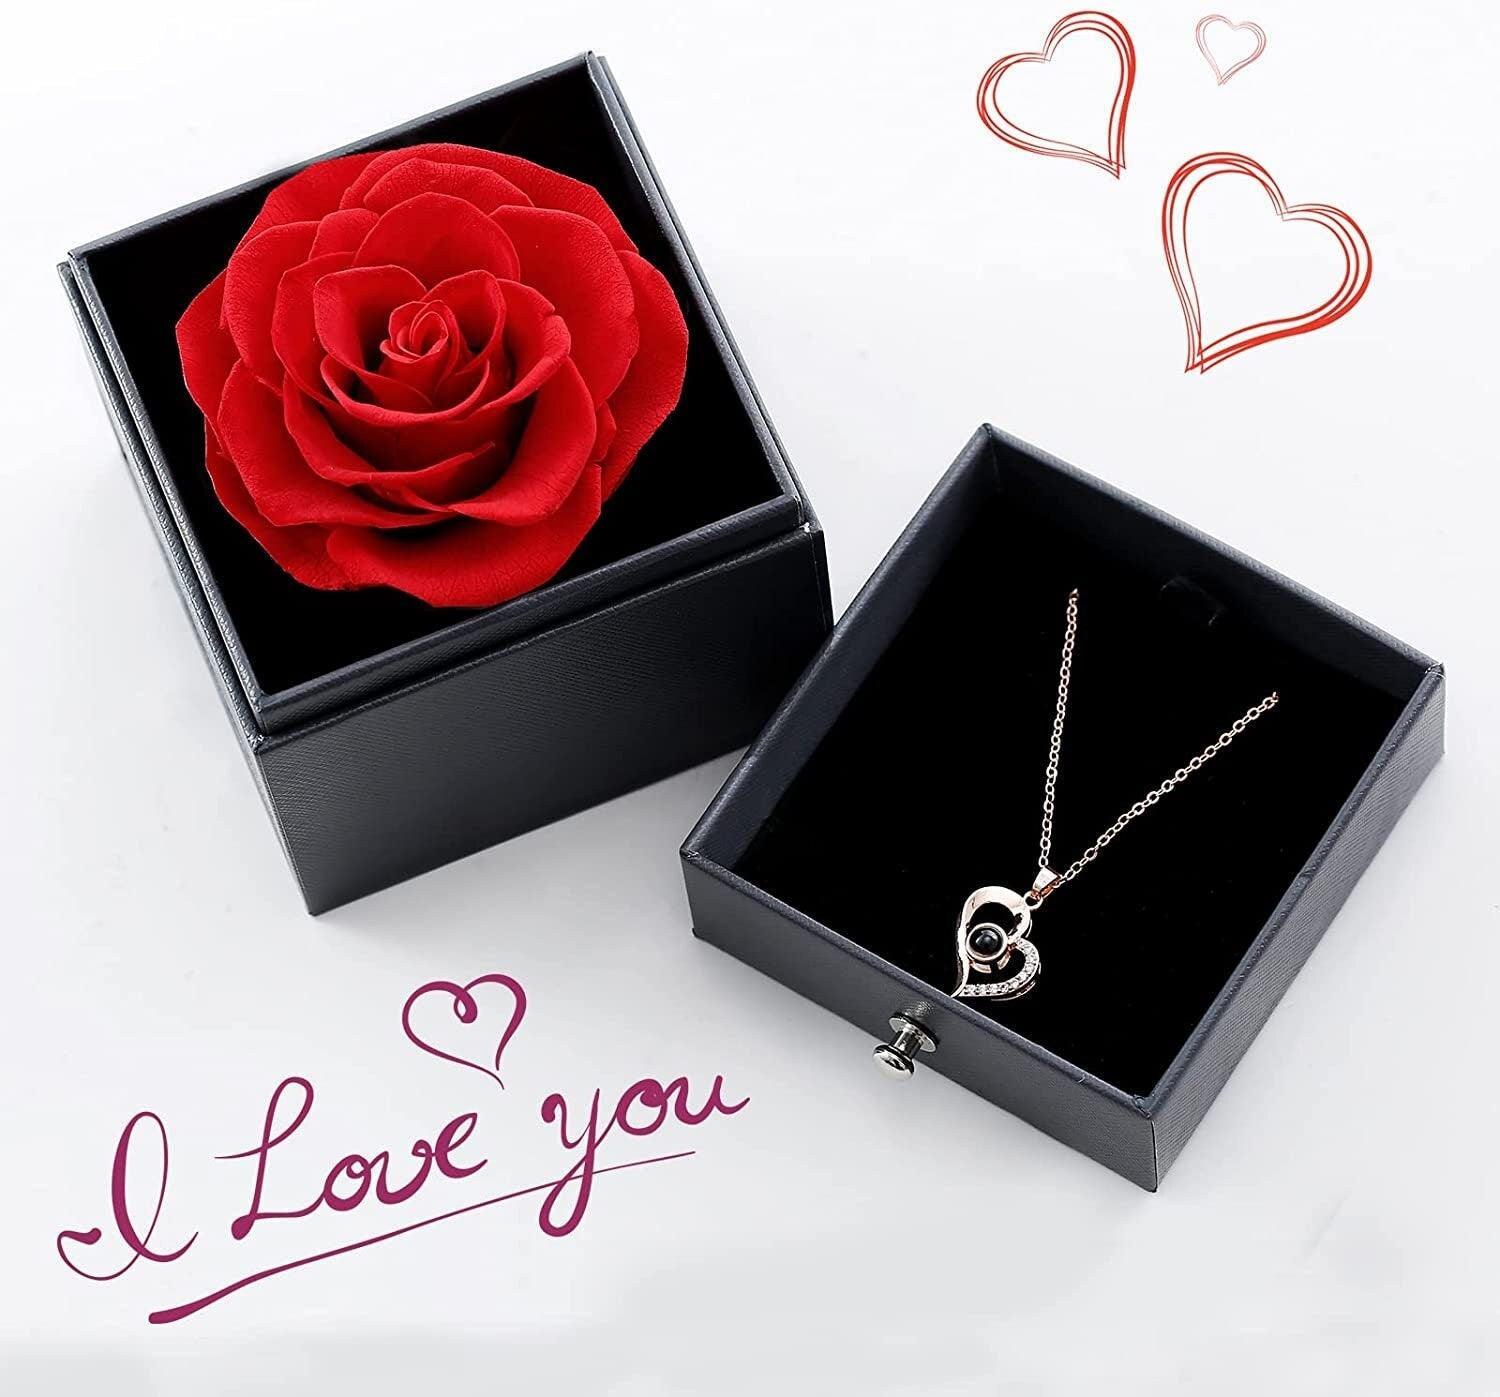 Sadnya Sadnya His and Hers Lover Couple I Love You Heart Locket With Chain  for Valentine's Day Gift (2 pieces - his and her) Rhodium Zinc, Metal  Pendant Set Black Silver Zinc